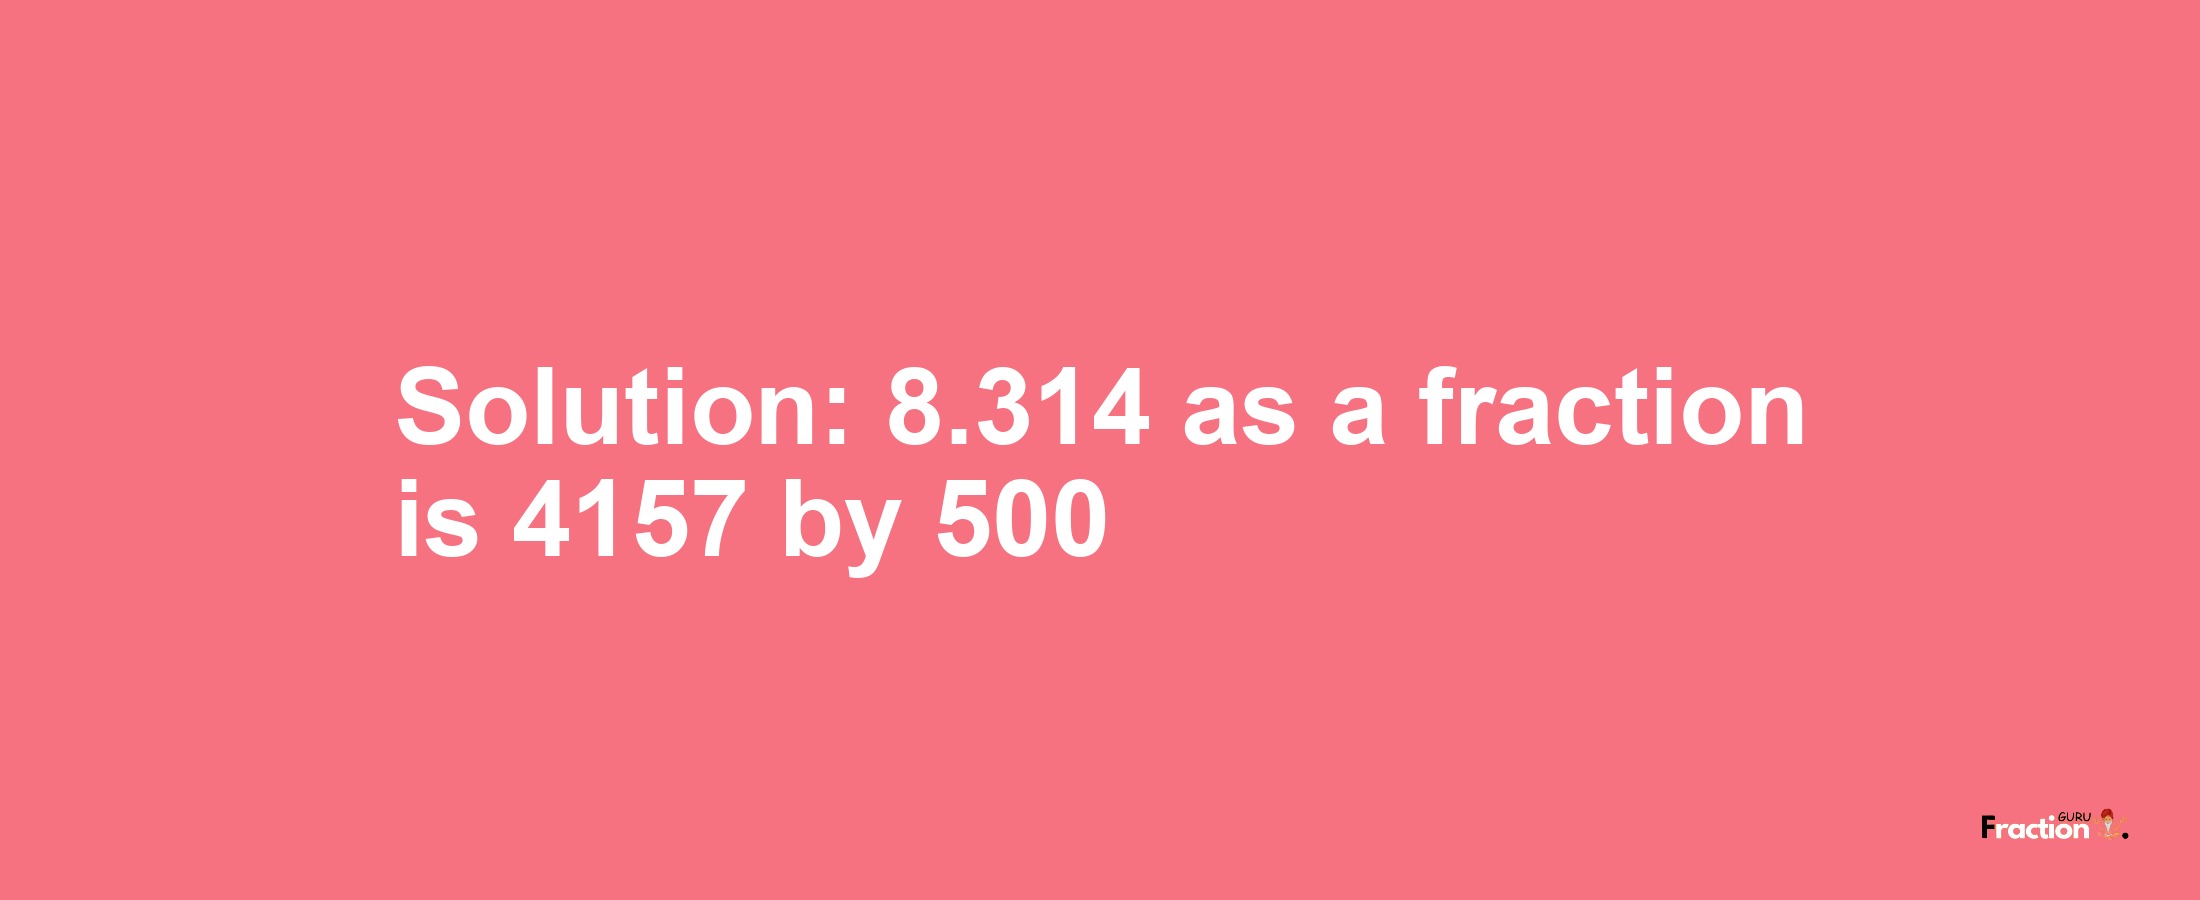 Solution:8.314 as a fraction is 4157/500